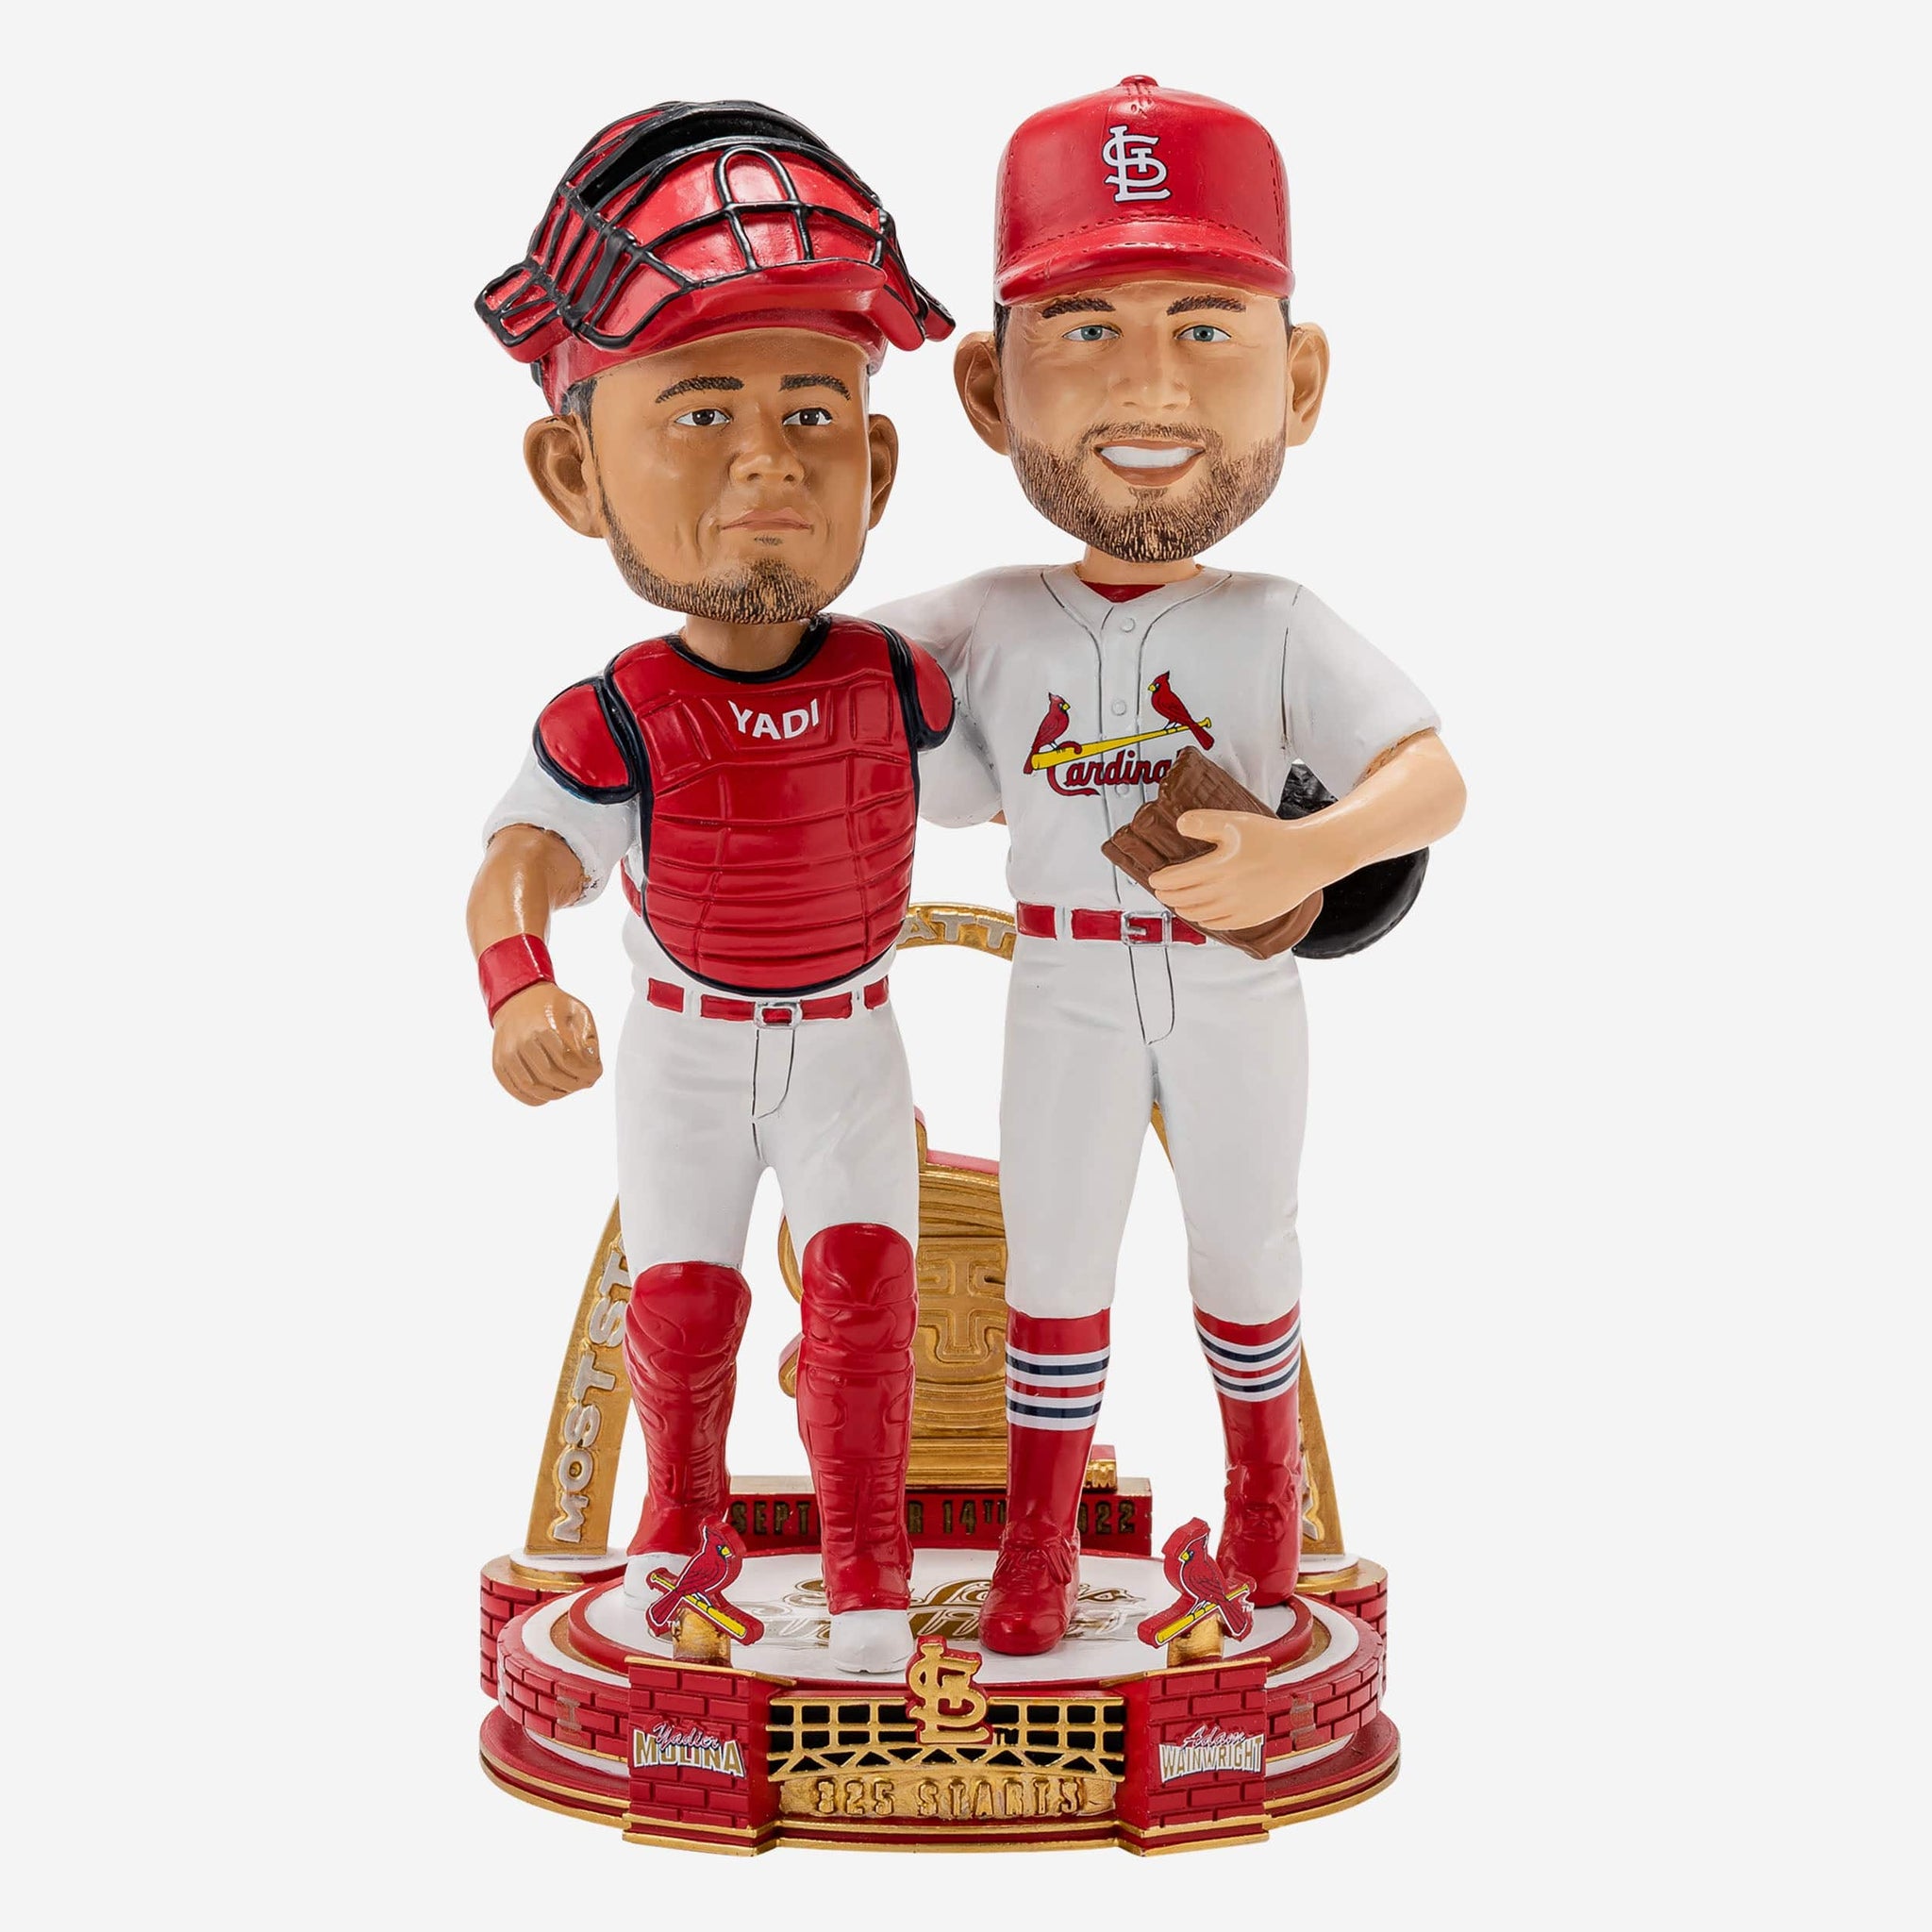 St Louis Cardinals History Mode 325 Best Beds Ever Yadi And Waino